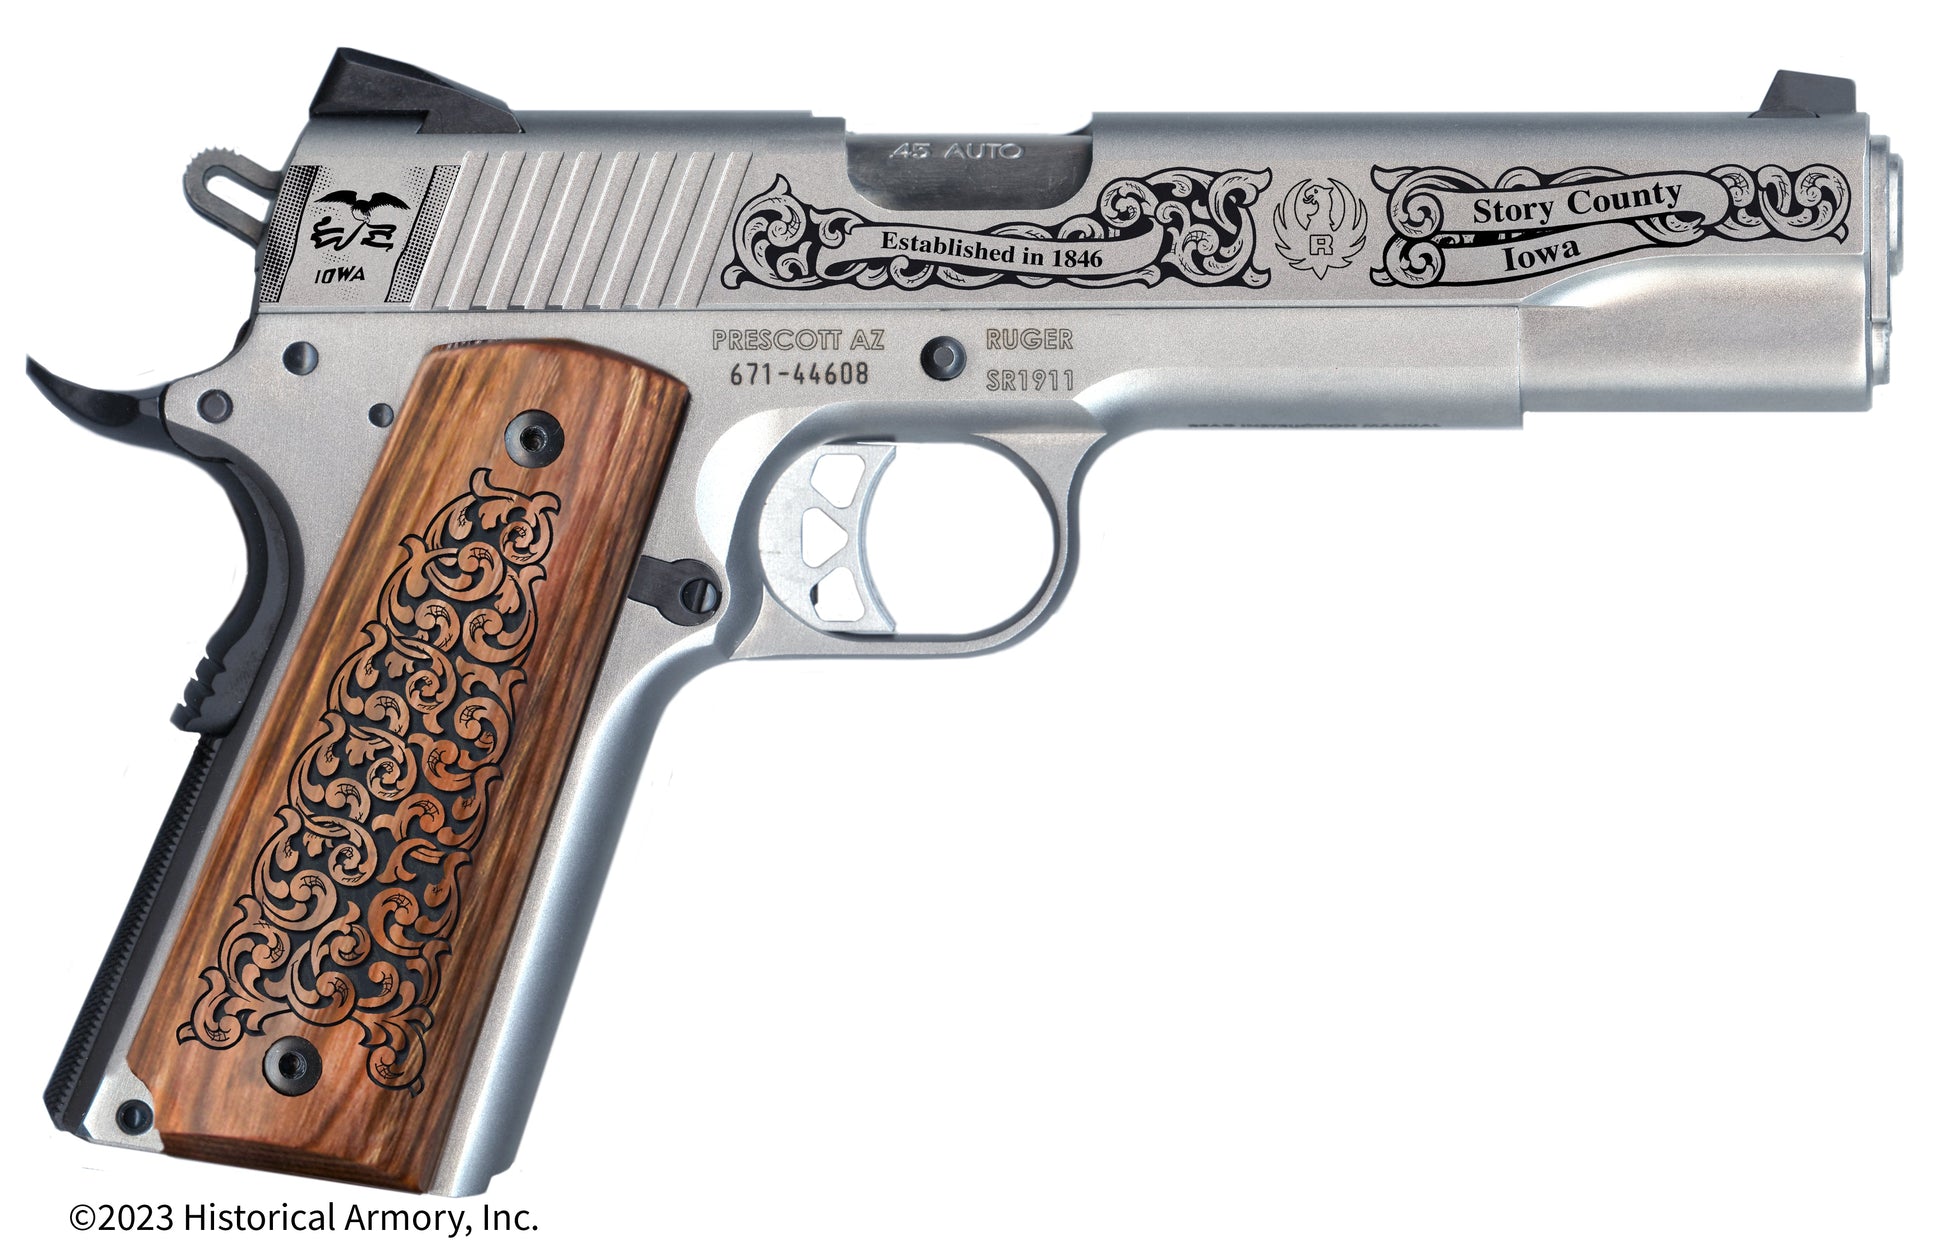 Story County Iowa Engraved .45 Auto Ruger 1911